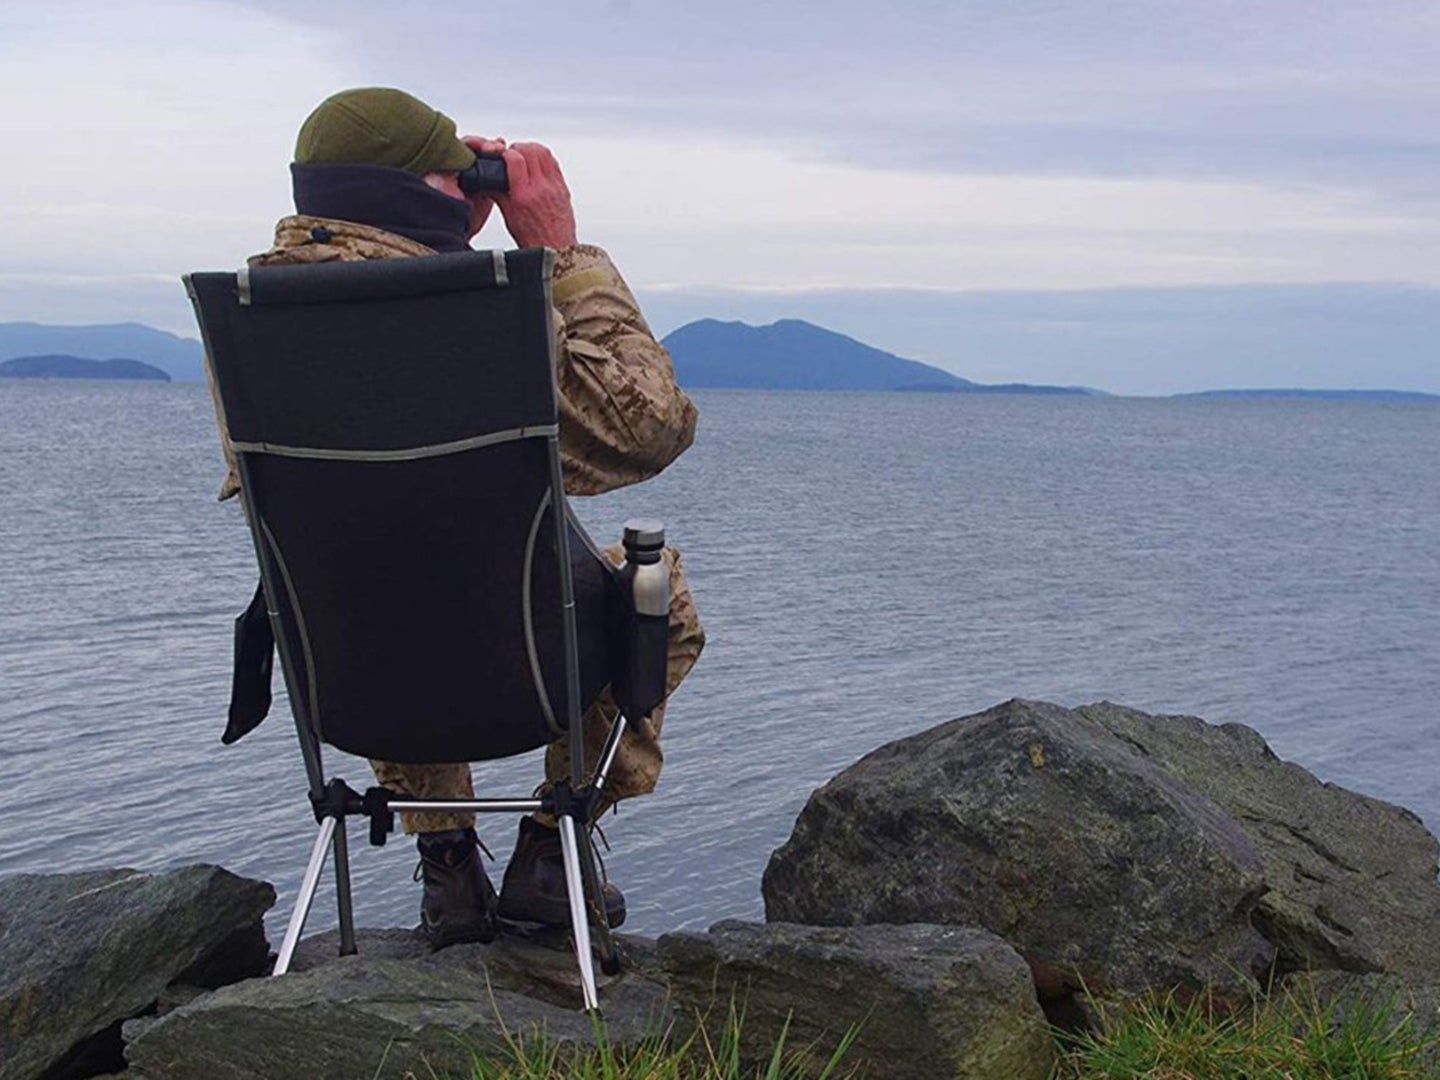 A person sits on a folding camping chair and looks out into a lake with binoculars